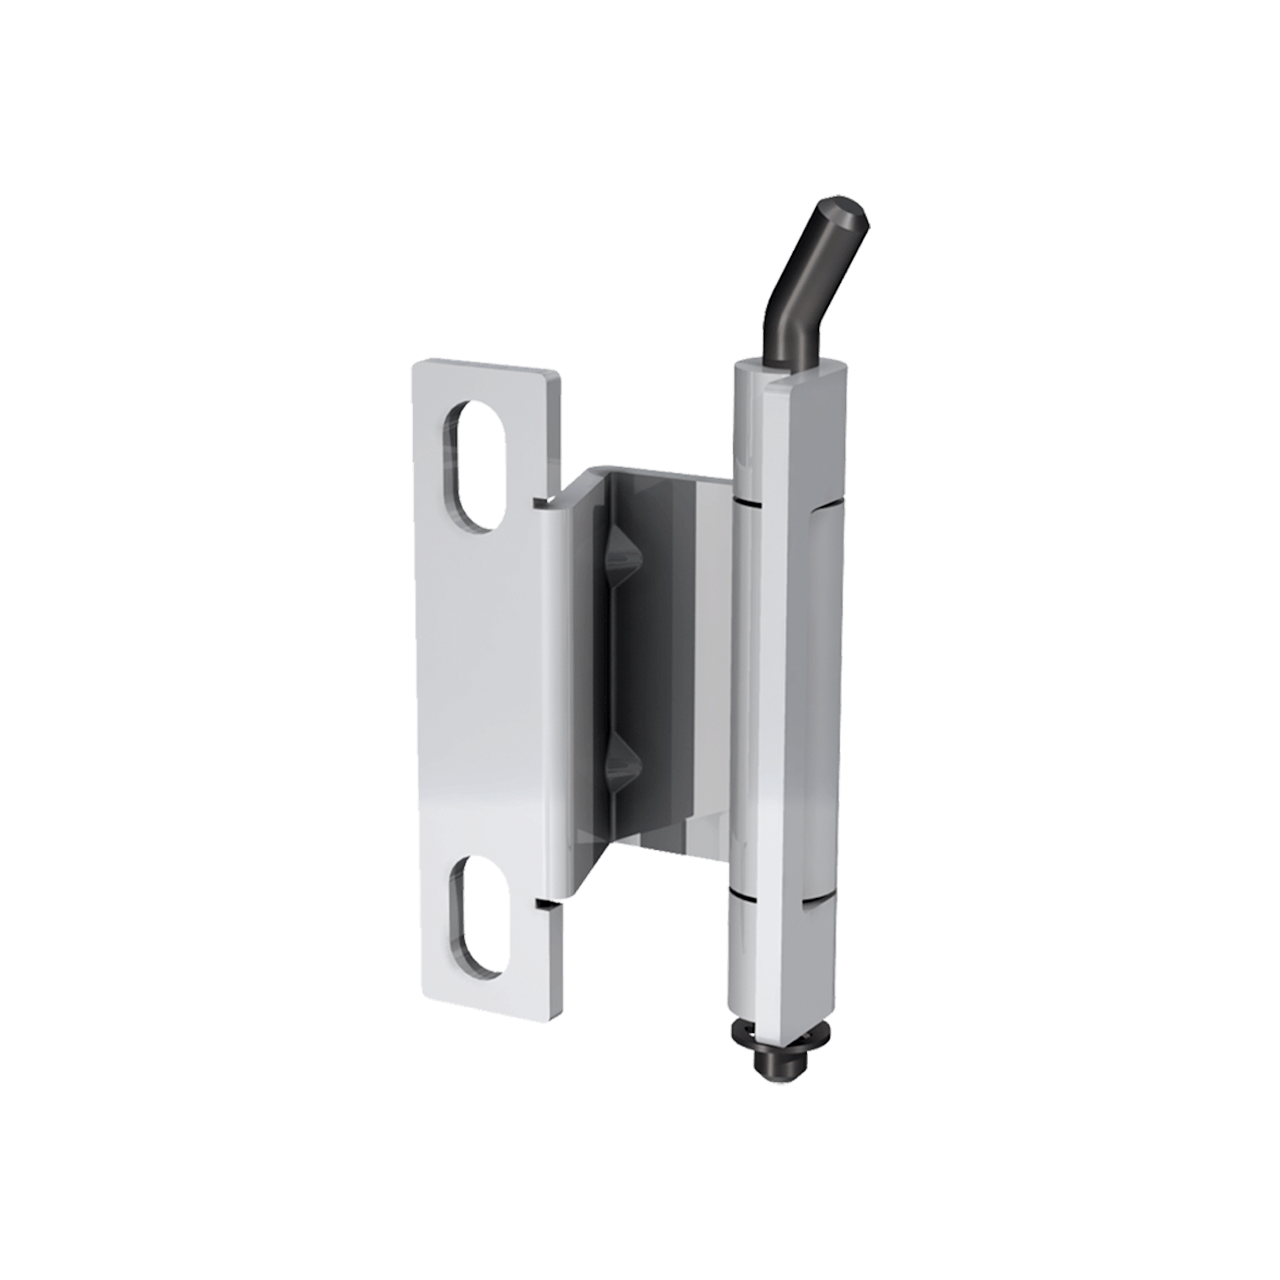 5 Polished Stainless Steel Strap Hinge